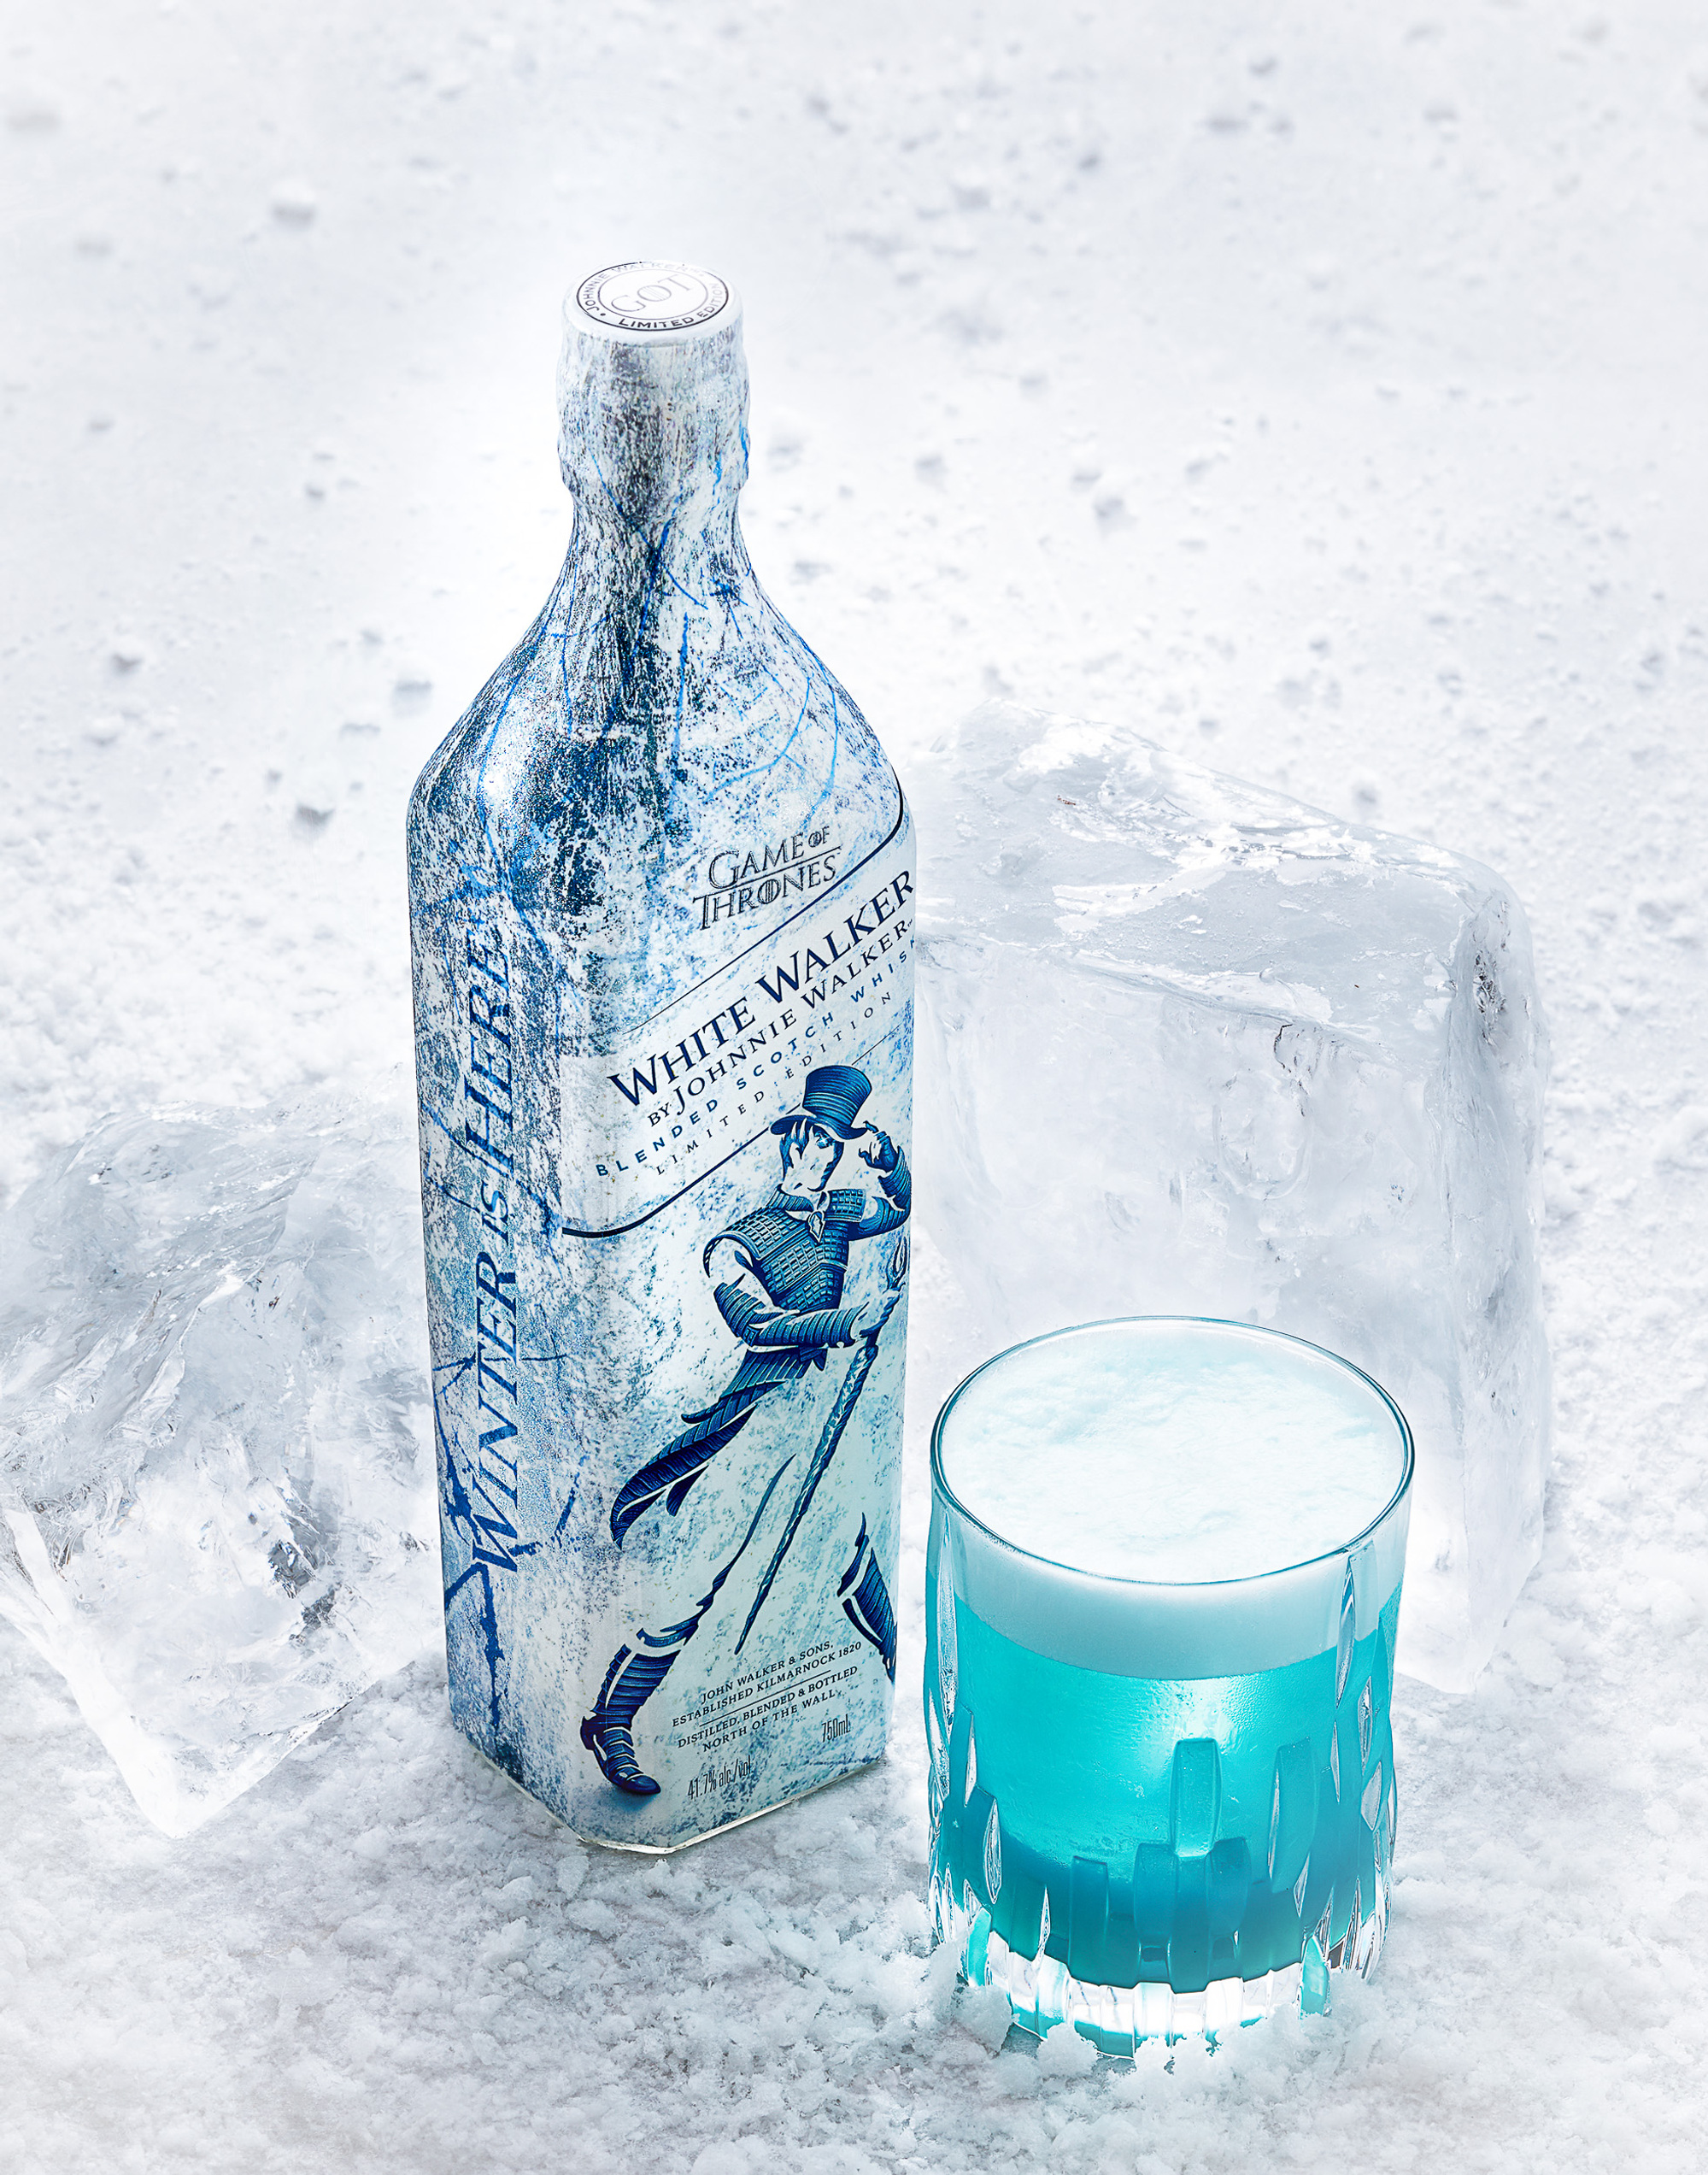 Johnnie Walker White Walker bottle and cocktail by beverage photographer Timothy Hogan. 

Beverages and alcohol product & advertising photography by Timothy Hogan Studio in Los Angeles